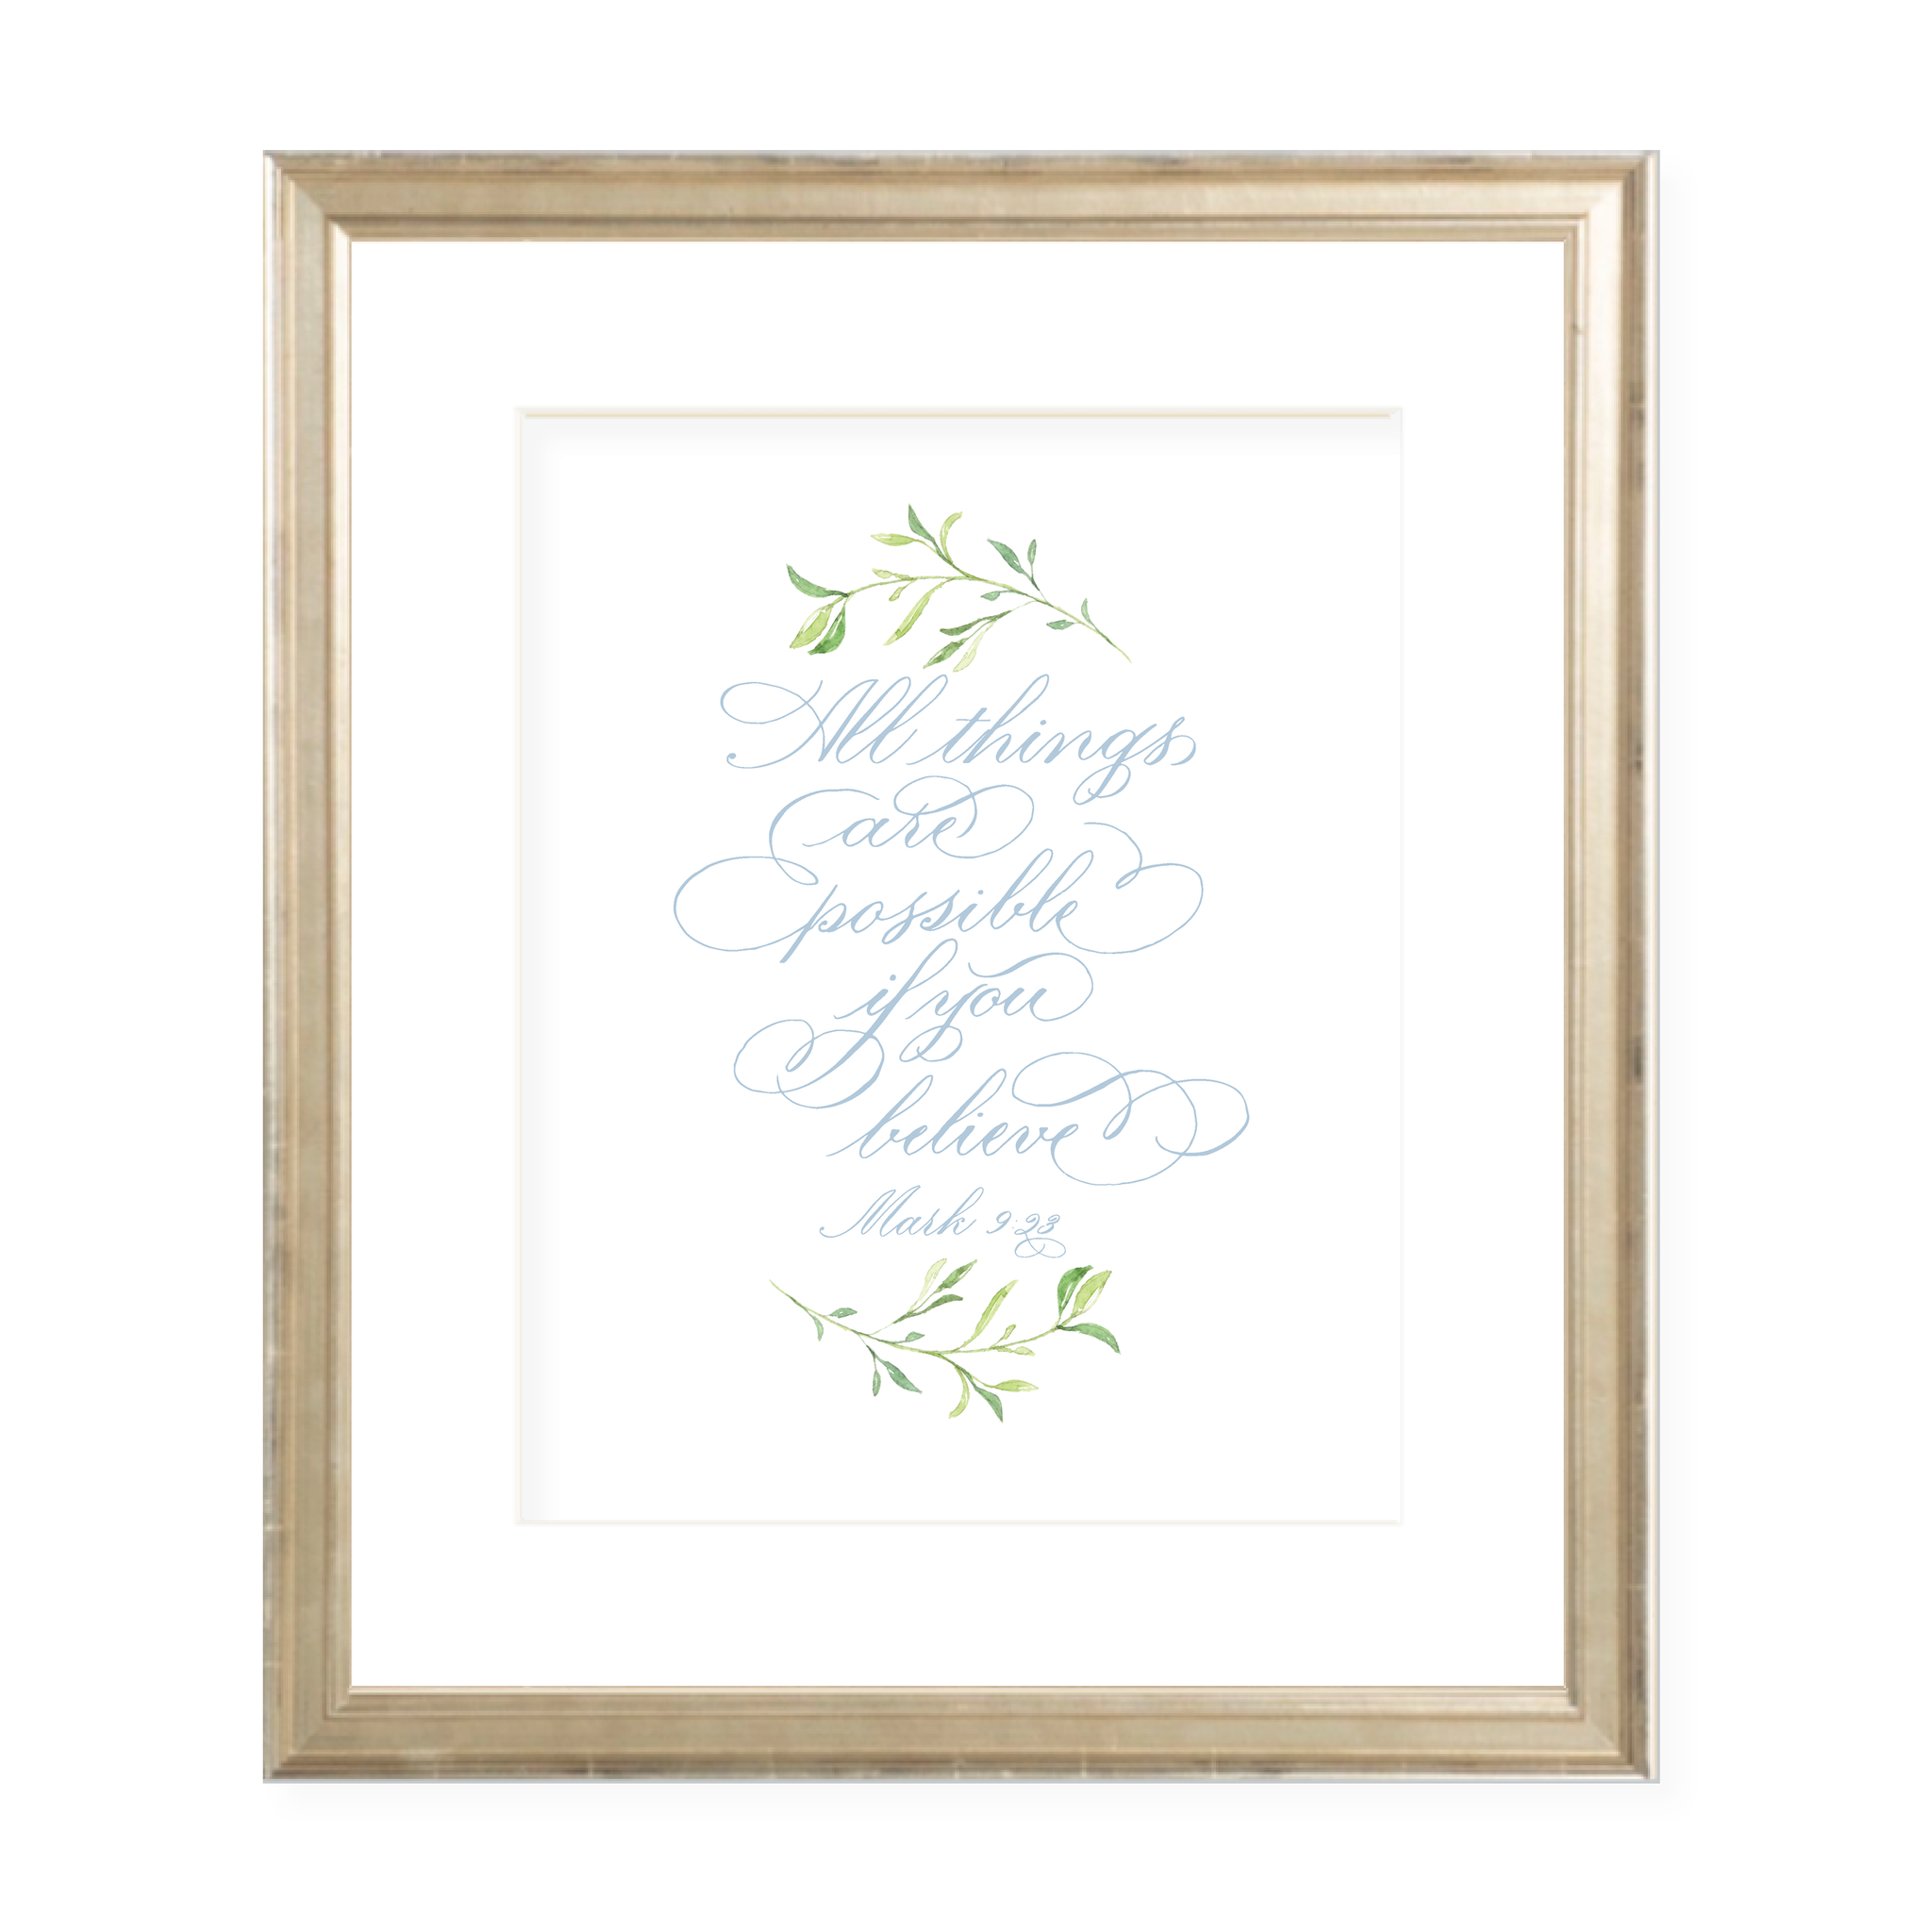 All Things are Possible Blue Calligraphy with Garland Portrait Watercolor Print